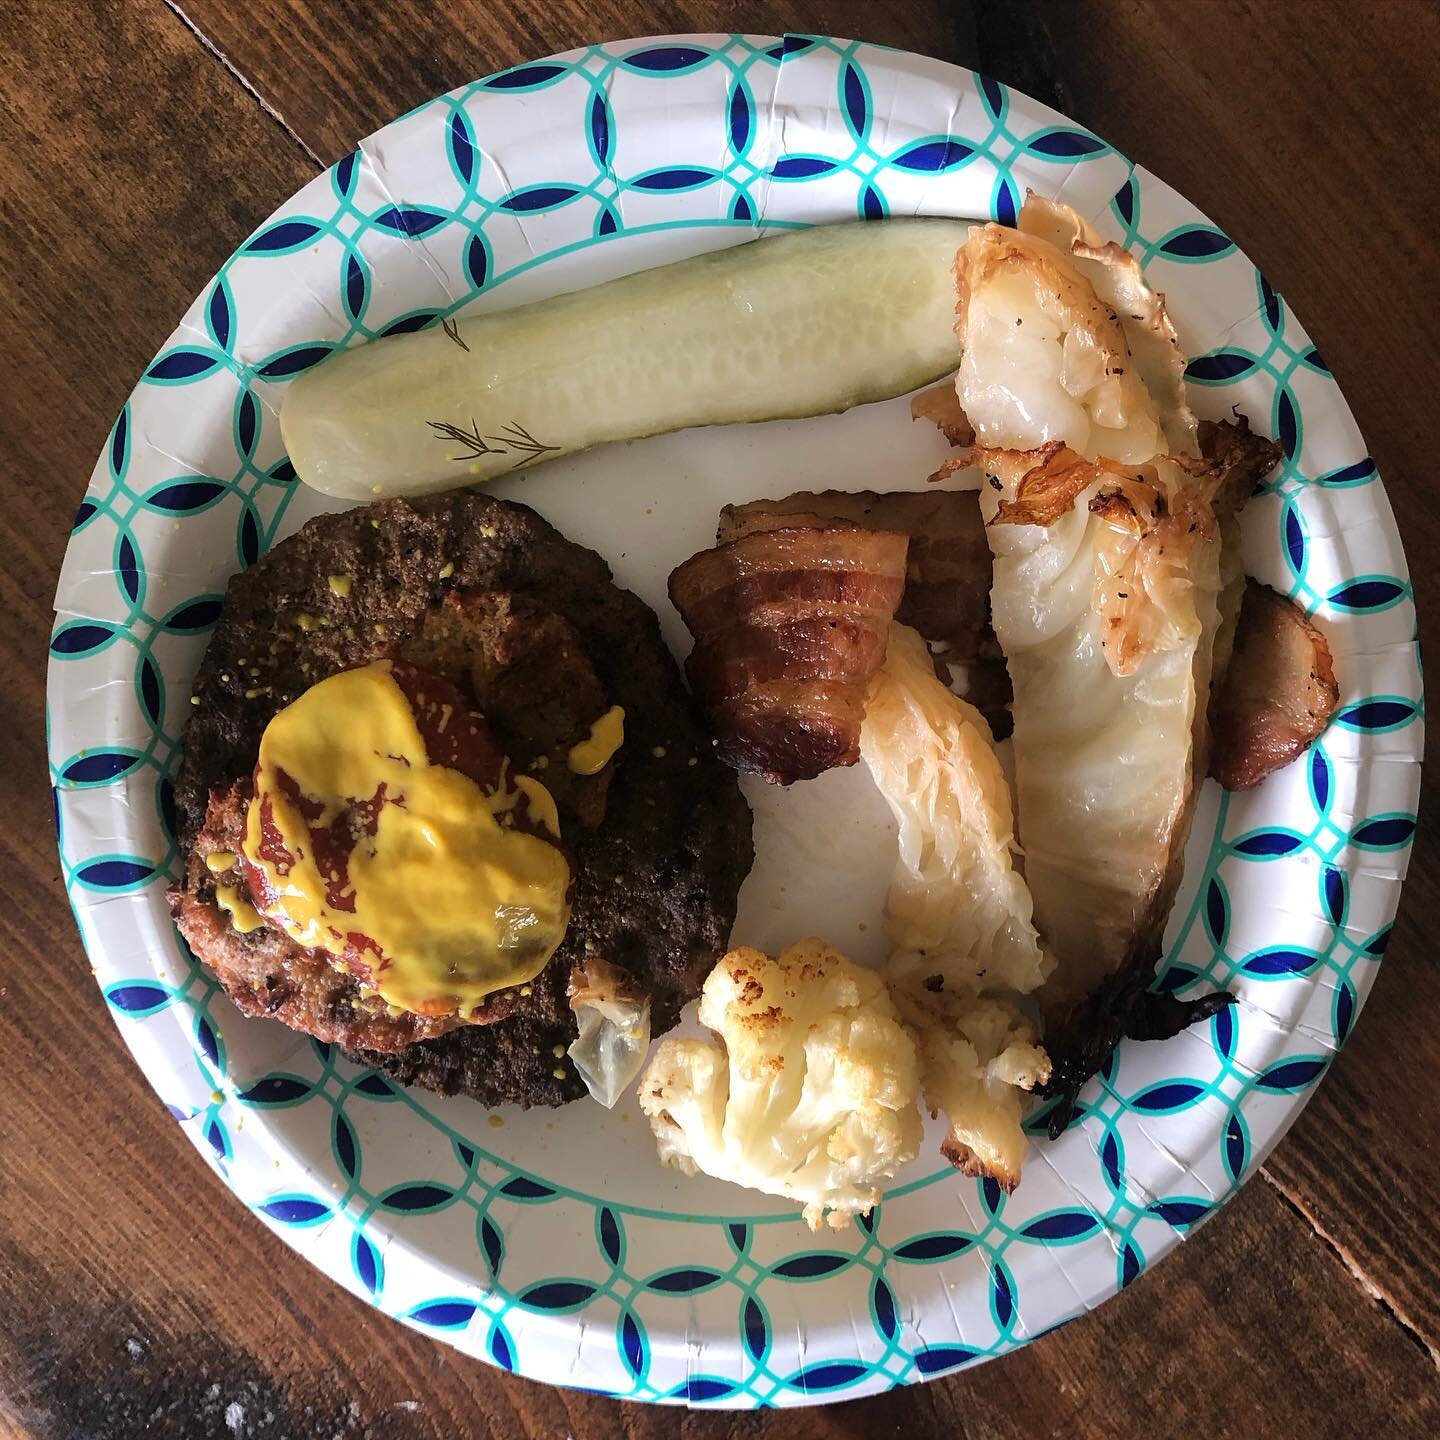 We had so many leftovers to work through that I&rsquo;m finally getting around to eating this week&rsquo;s food.
- burger with ketchup and mustard
- bacon wrapped cabbage 
- roasted cauliflower 
- pickle
.
I&rsquo;ll be sharing my homemade refrigerat